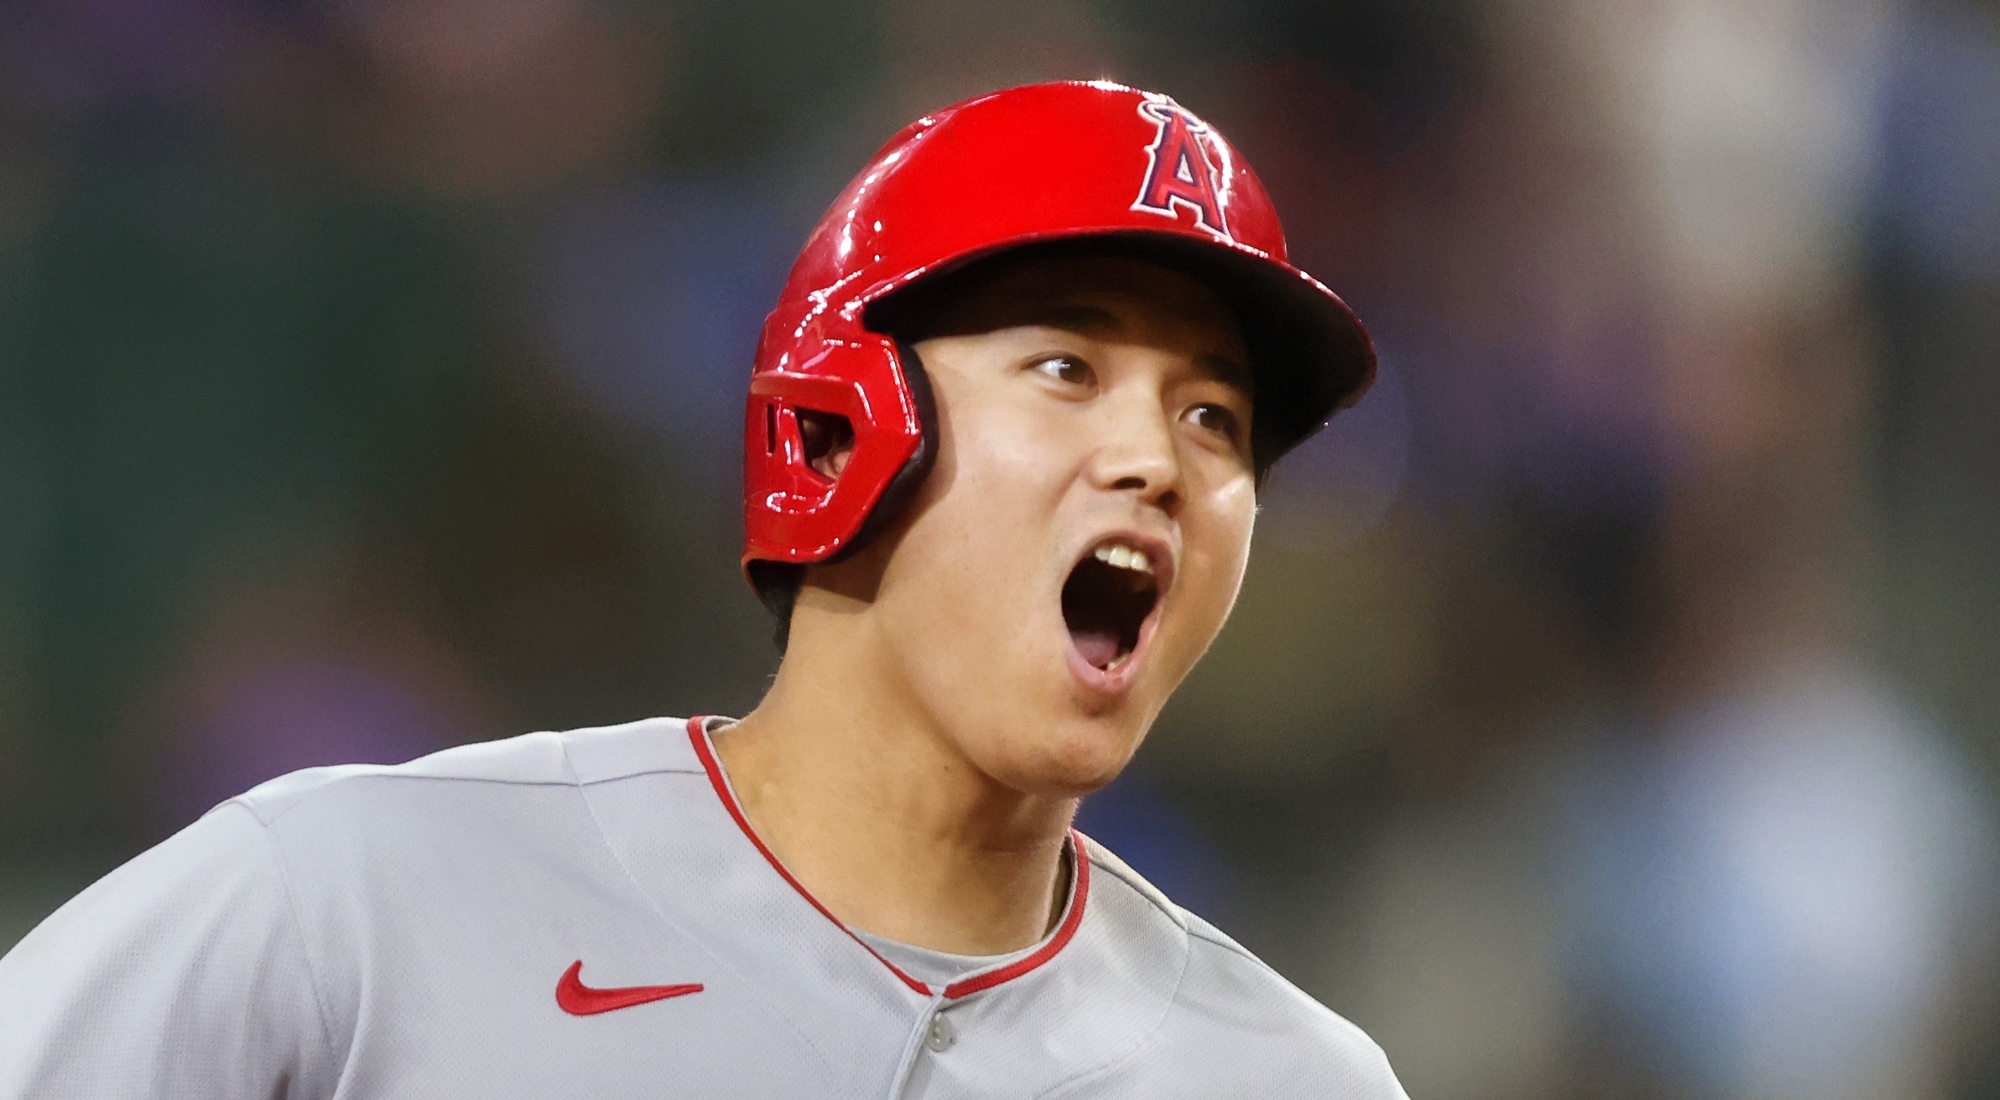 Who could entice the Los Angeles Angles to trade Shohei Ohtani?